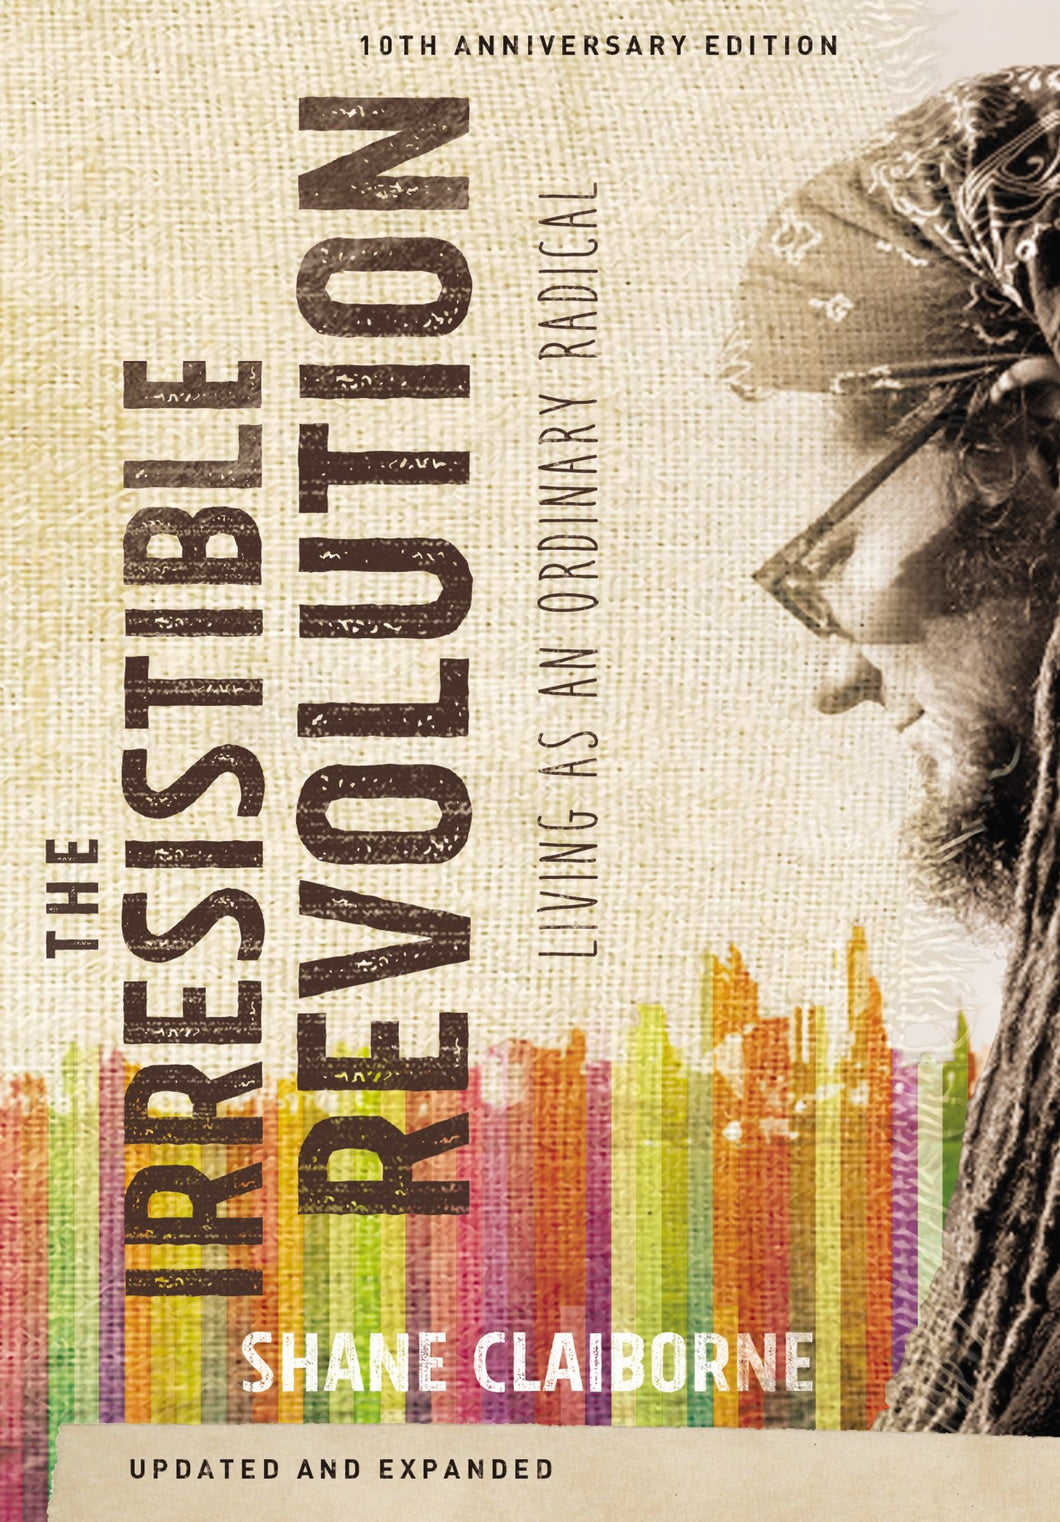 The Irresistible Revolution: Living as an Ordinary Radical by Shane Claiborne